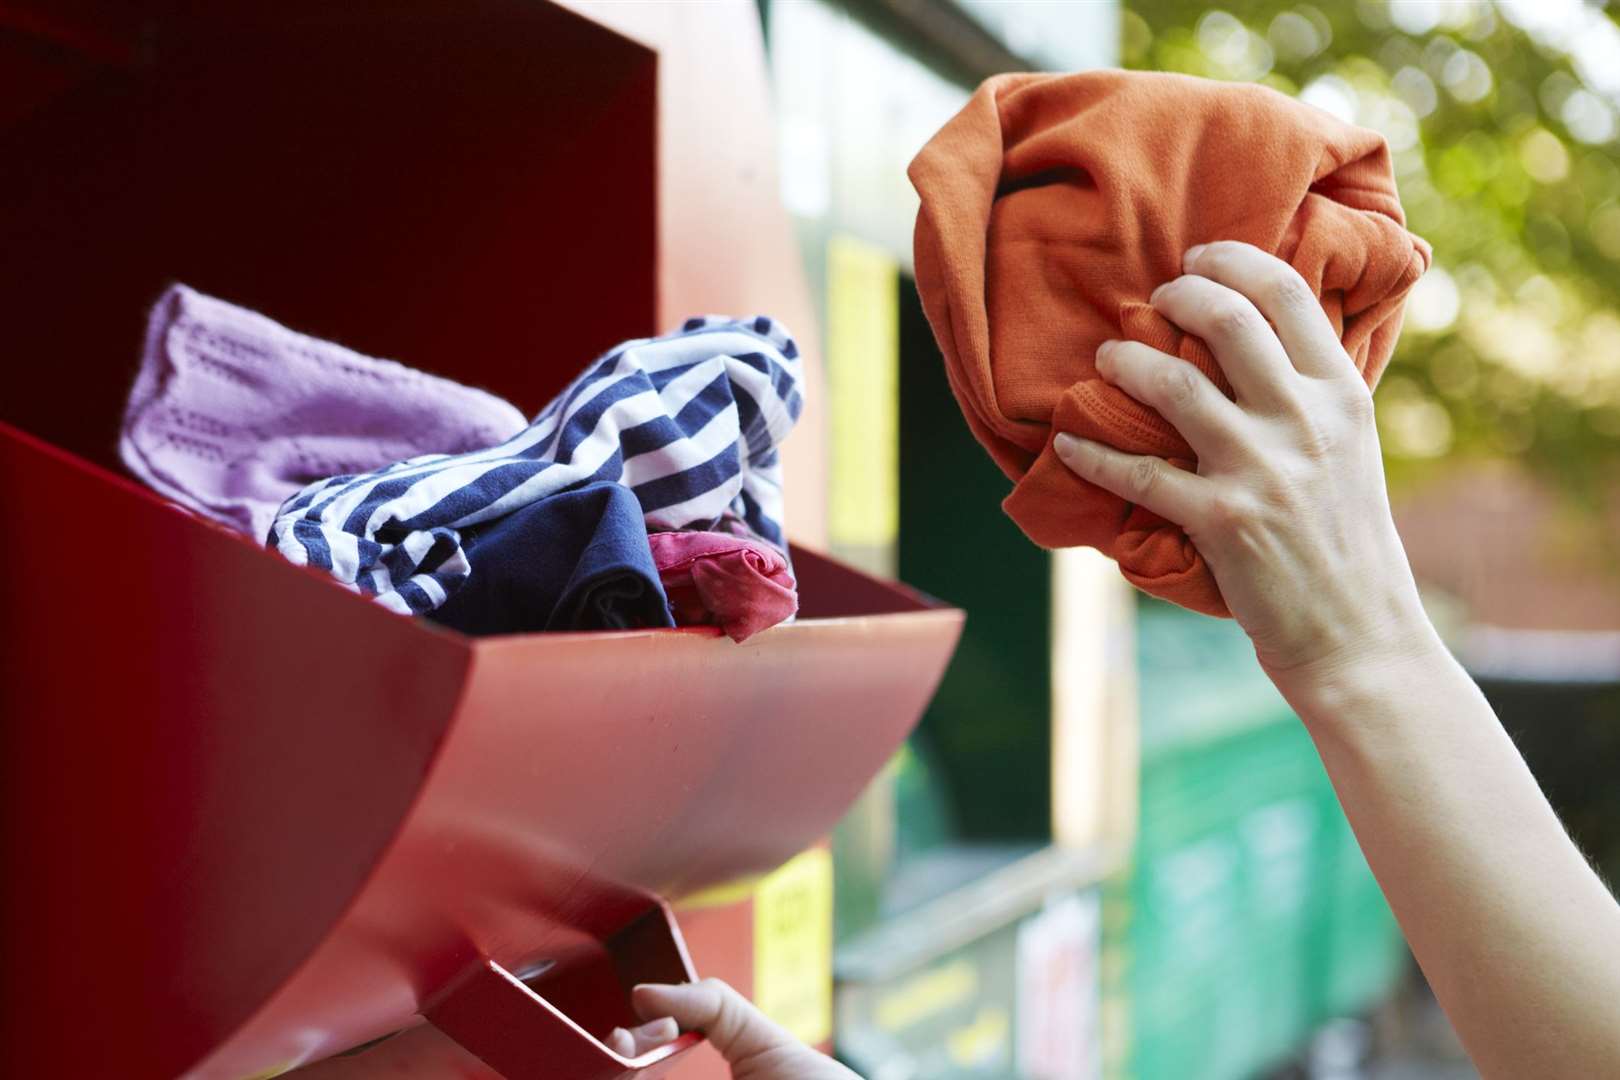 Asda says only 1% of clothes are currently recycled